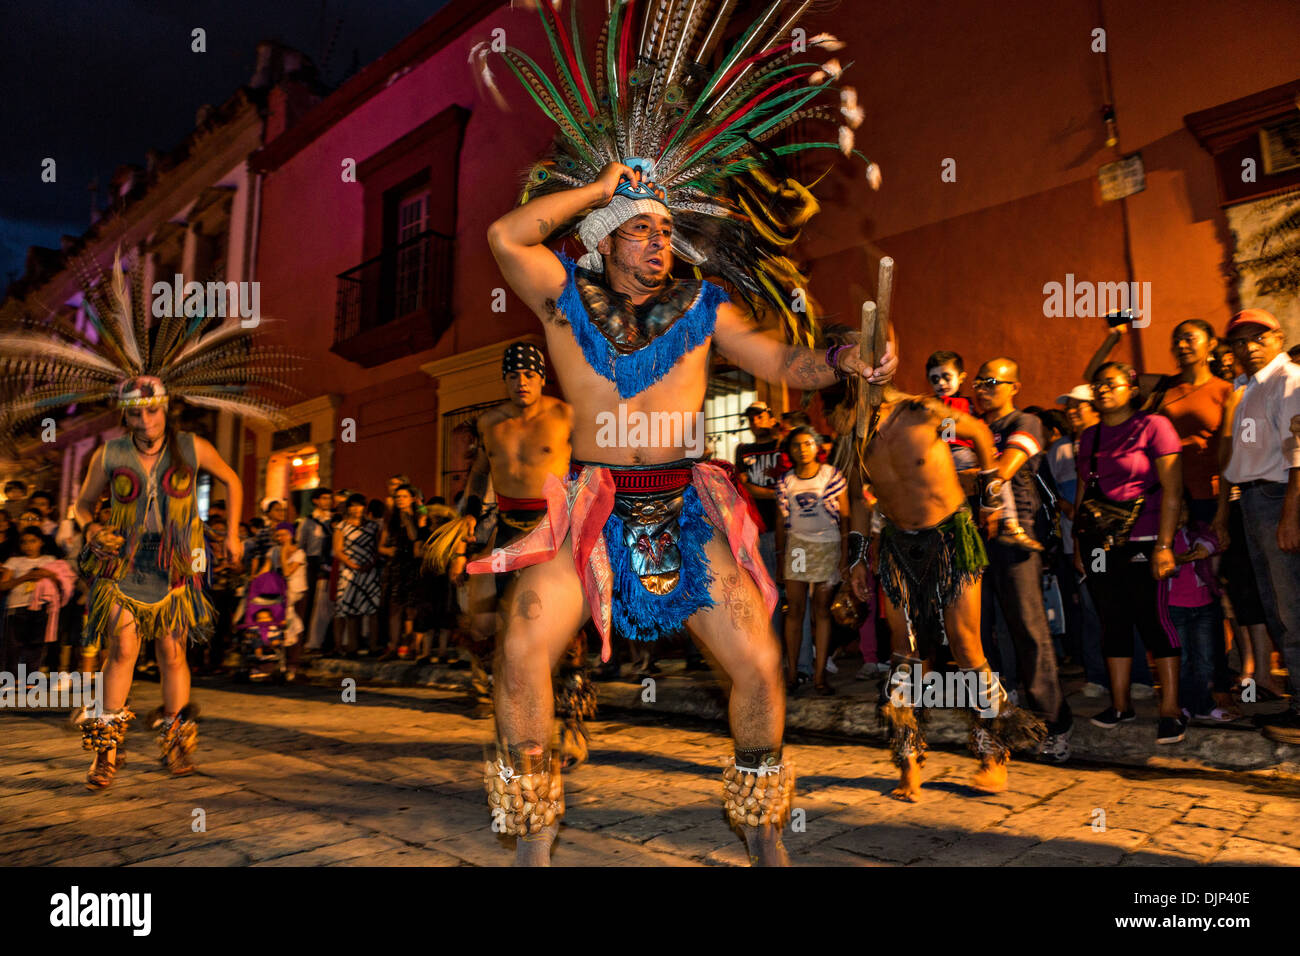 Costumed Mayan Indians celebrating the Day of the Dead festival known in spanish as Día de Muertos November 1, 2013 in Oaxaca, Mexico. Stock Photo